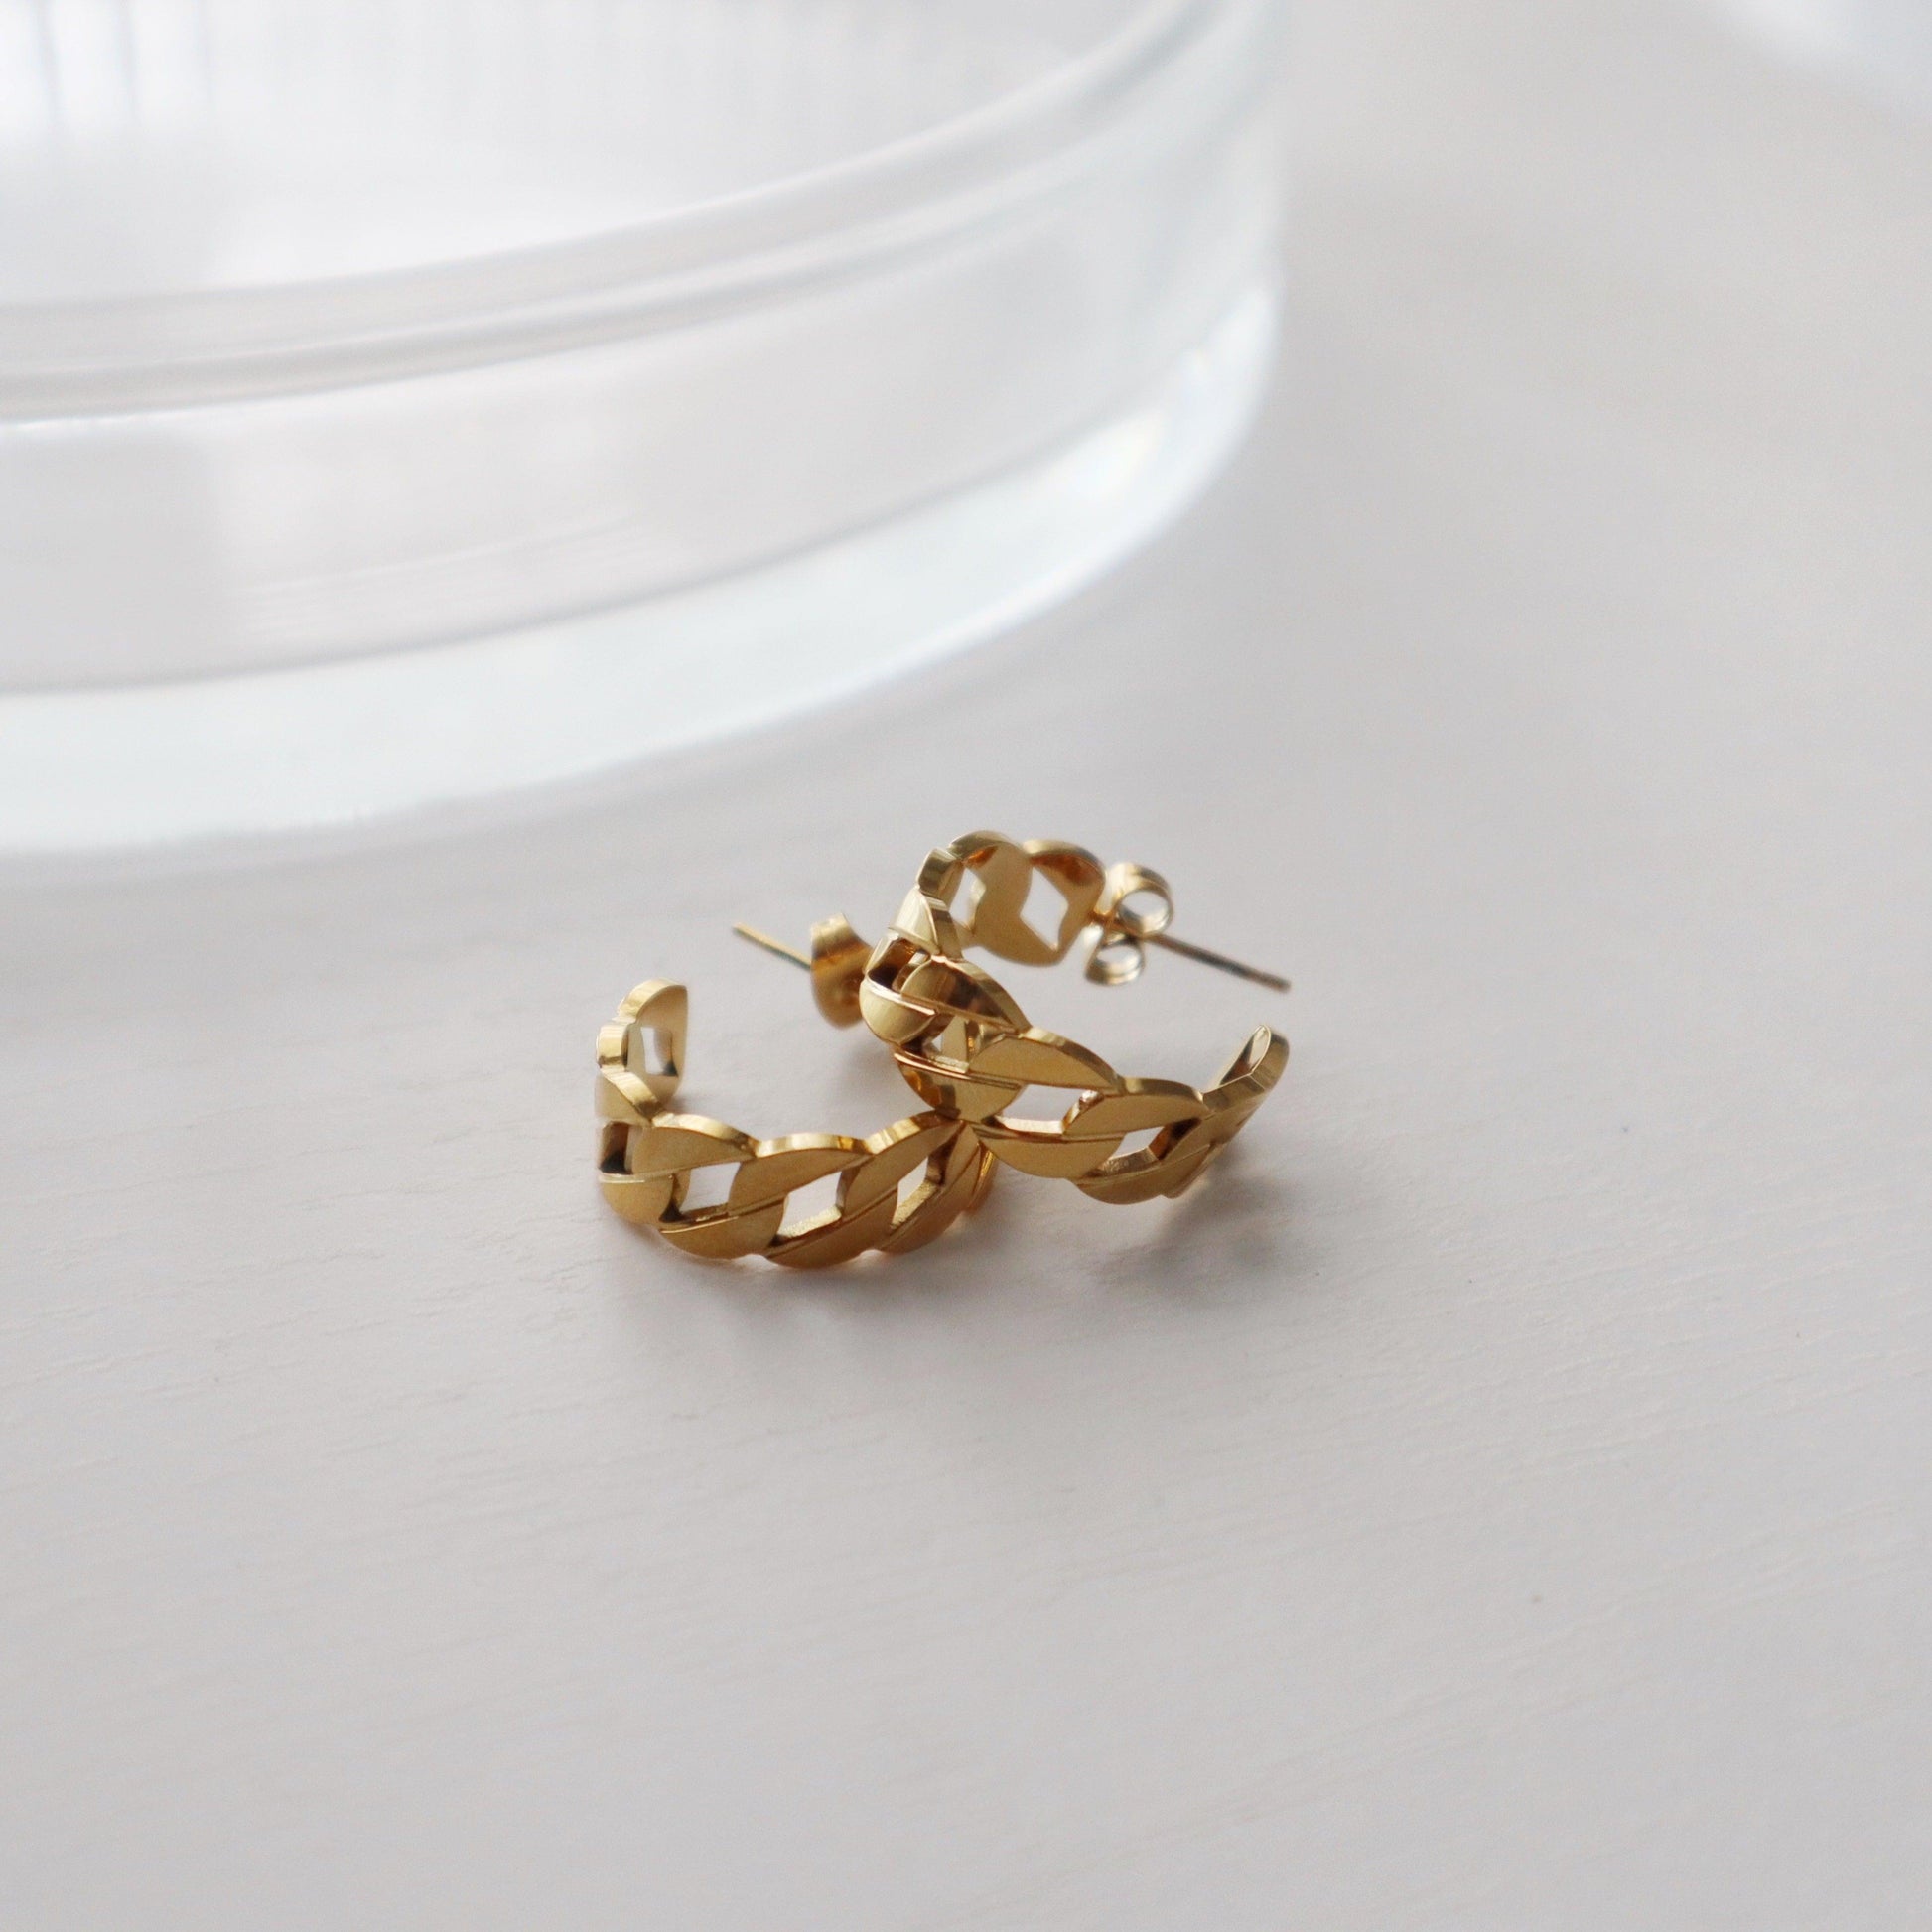 Cora Hoops | Chain Hoops - JESSA JEWELRY | GOLD JEWELRY; dainty, affordable gold everyday jewelry. Tarnish free, water-resistant, hypoallergenic. Jewelry for everyday wear